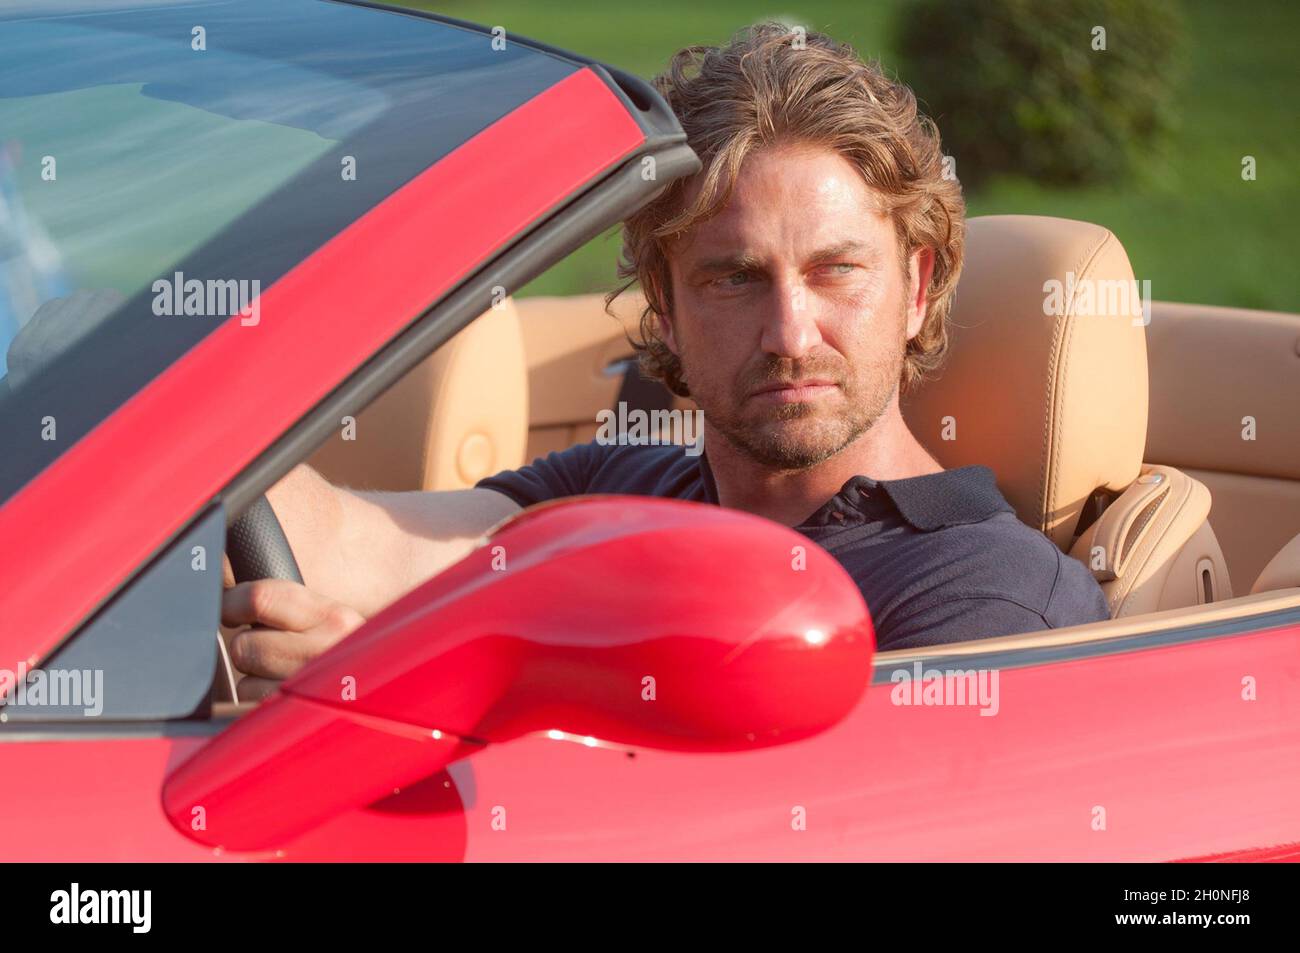 Los Angeles, USA. Gerard Butler in a scene from the FilmDistrict new film: Playing the Field (2012). Plot: A former professional athlete with a weak past tries to redeem himself by coaching his son's soccer team, only to find himself unable to resist when in scoring position with his players' restless and gorgeous moms...  Ref:LMK106-33411-180112 Supplied by LMKMEDIA. Editorial Only. Landmark Media is not the copyright owner of these Film or TV stills but provides a service only for recognised Media outlets. pictures@lmkmedia.com Stock Photo